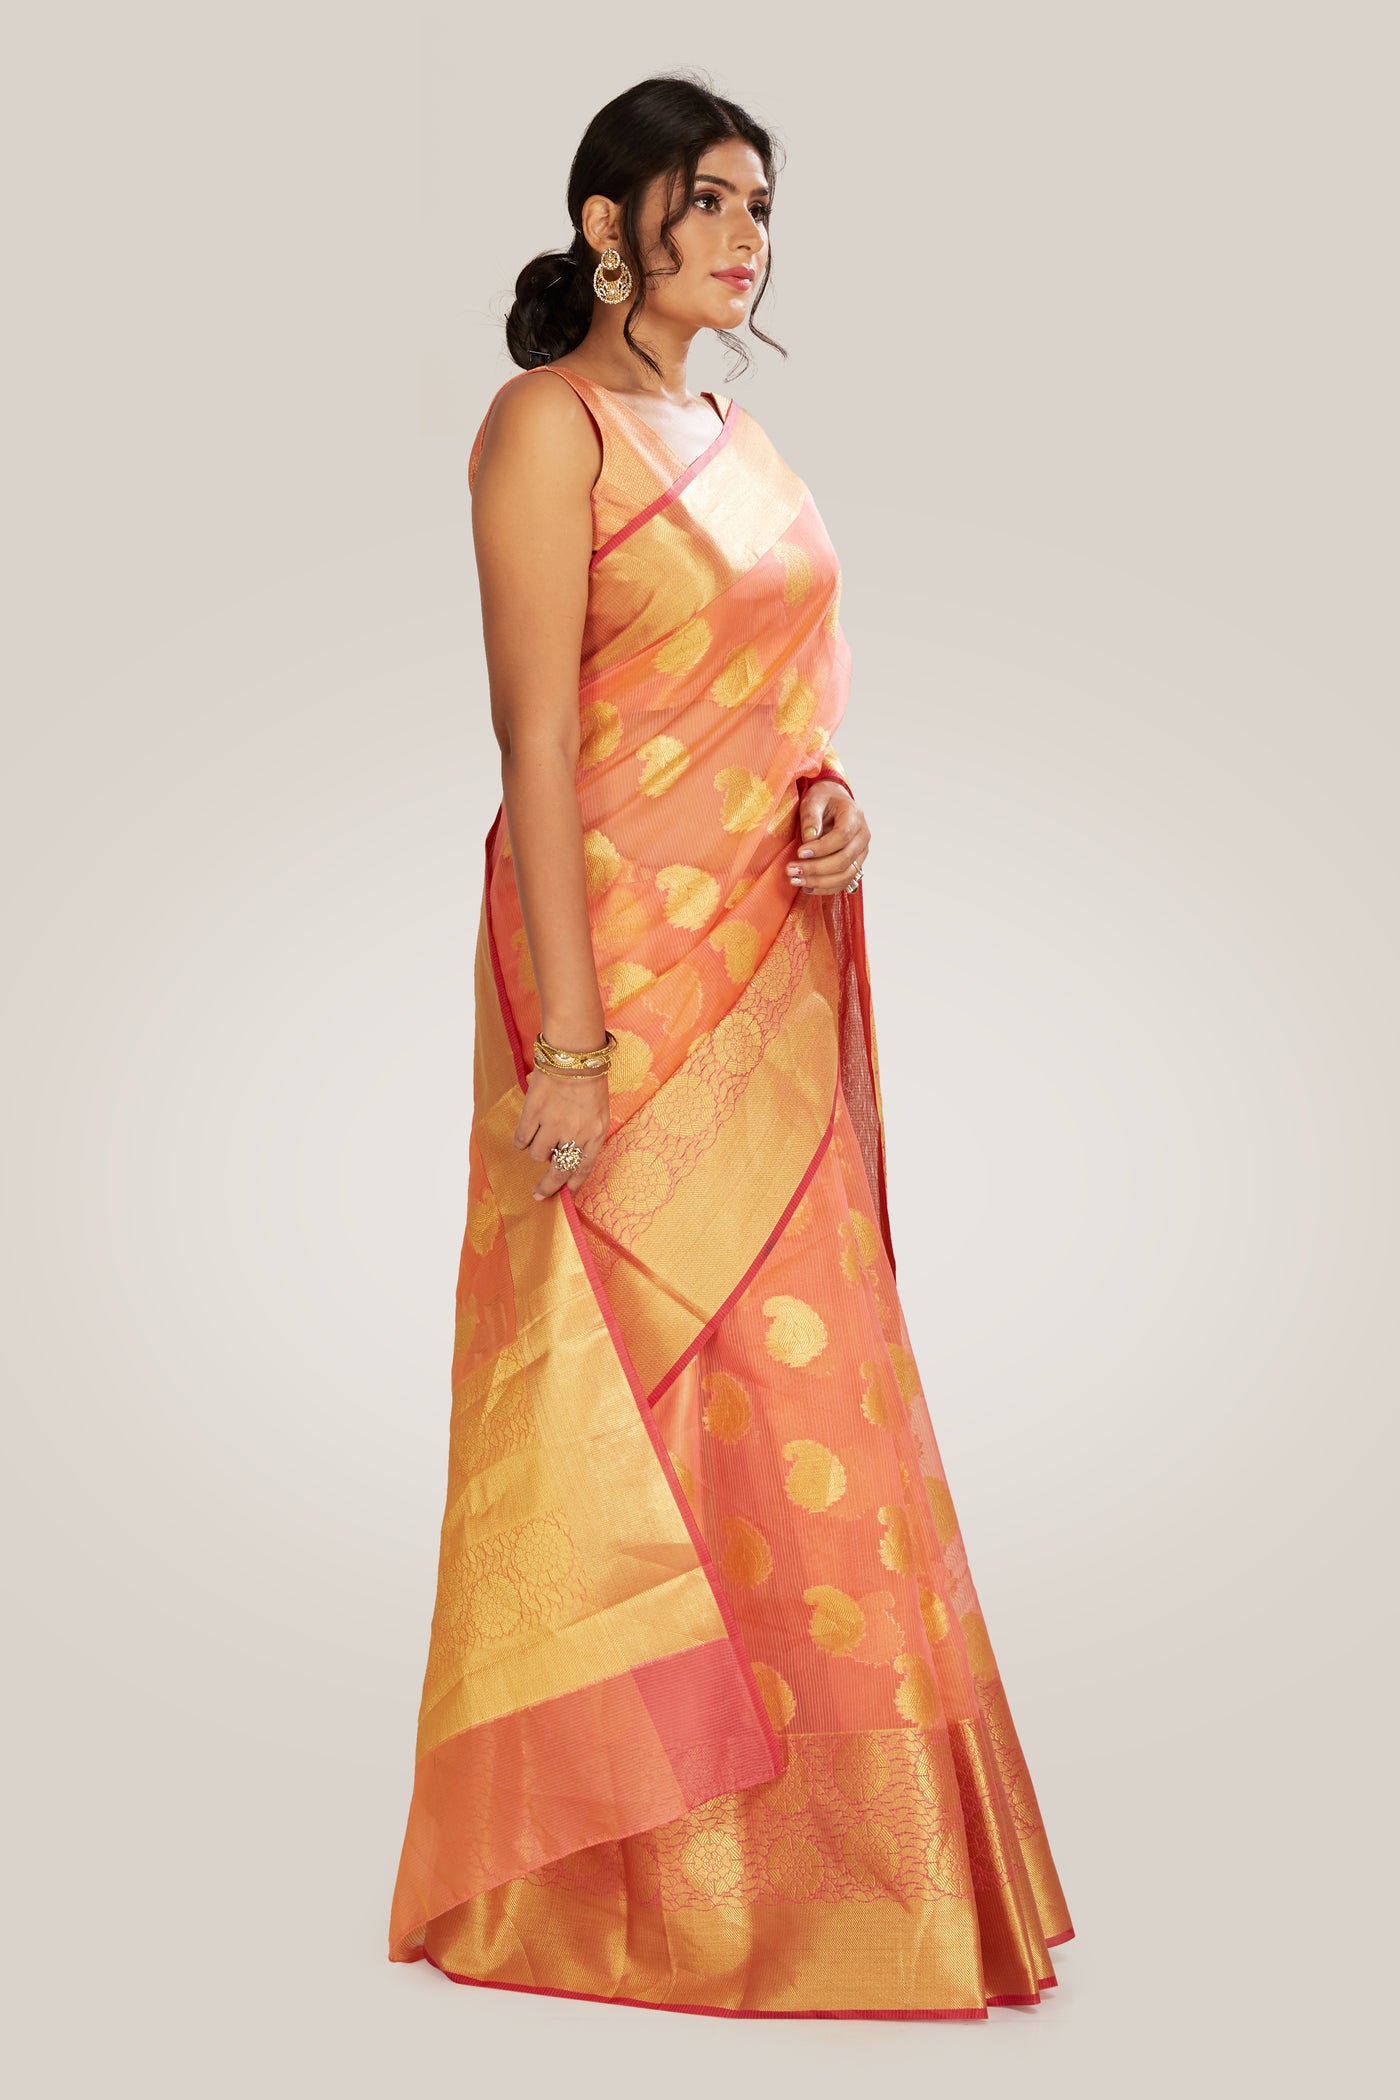 Banarasi Saree in Peach-Gold - Indian Clothing in Denver, CO, Aurora, CO, Boulder, CO, Fort Collins, CO, Colorado Springs, CO, Parker, CO, Highlands Ranch, CO, Cherry Creek, CO, Centennial, CO, and Longmont, CO. Nationwide shipping USA - India Fashion X